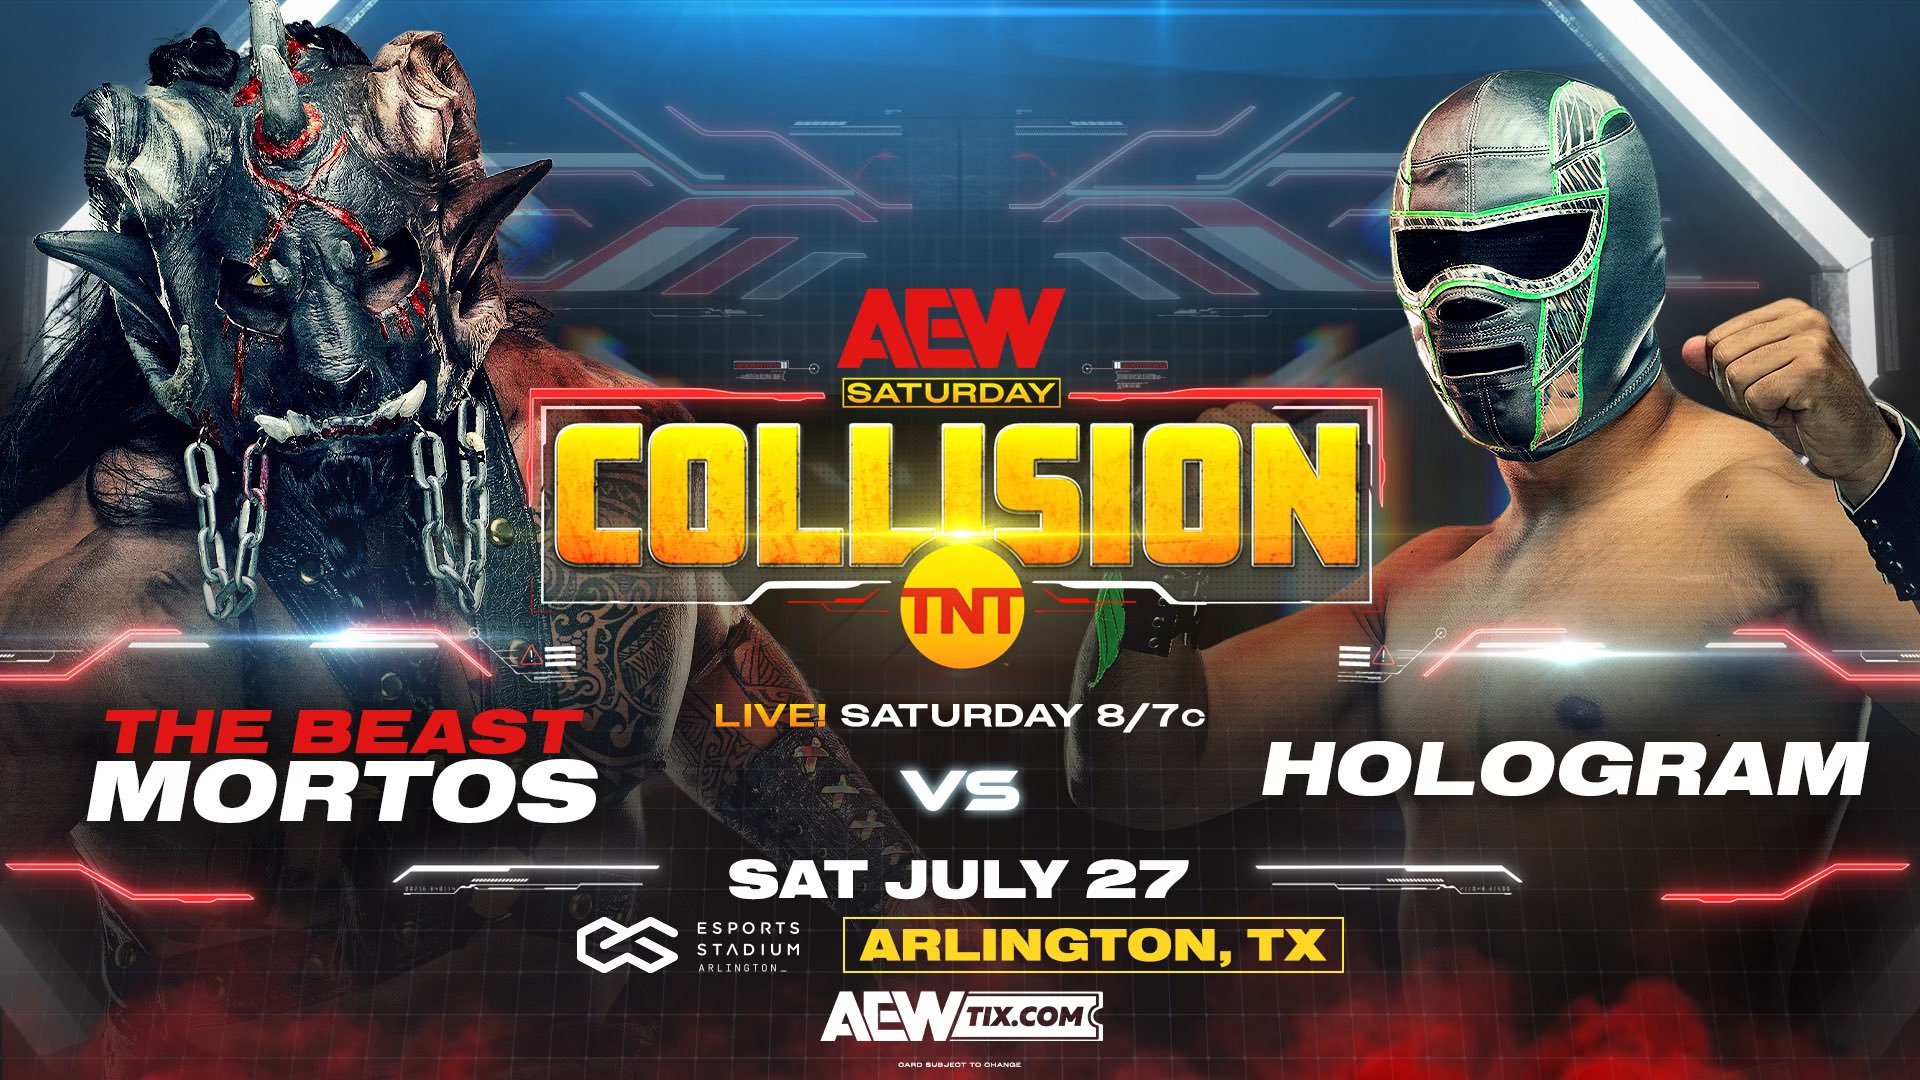 Hologam vs. The Beast Mortos Announced For July 27th AEW Collision